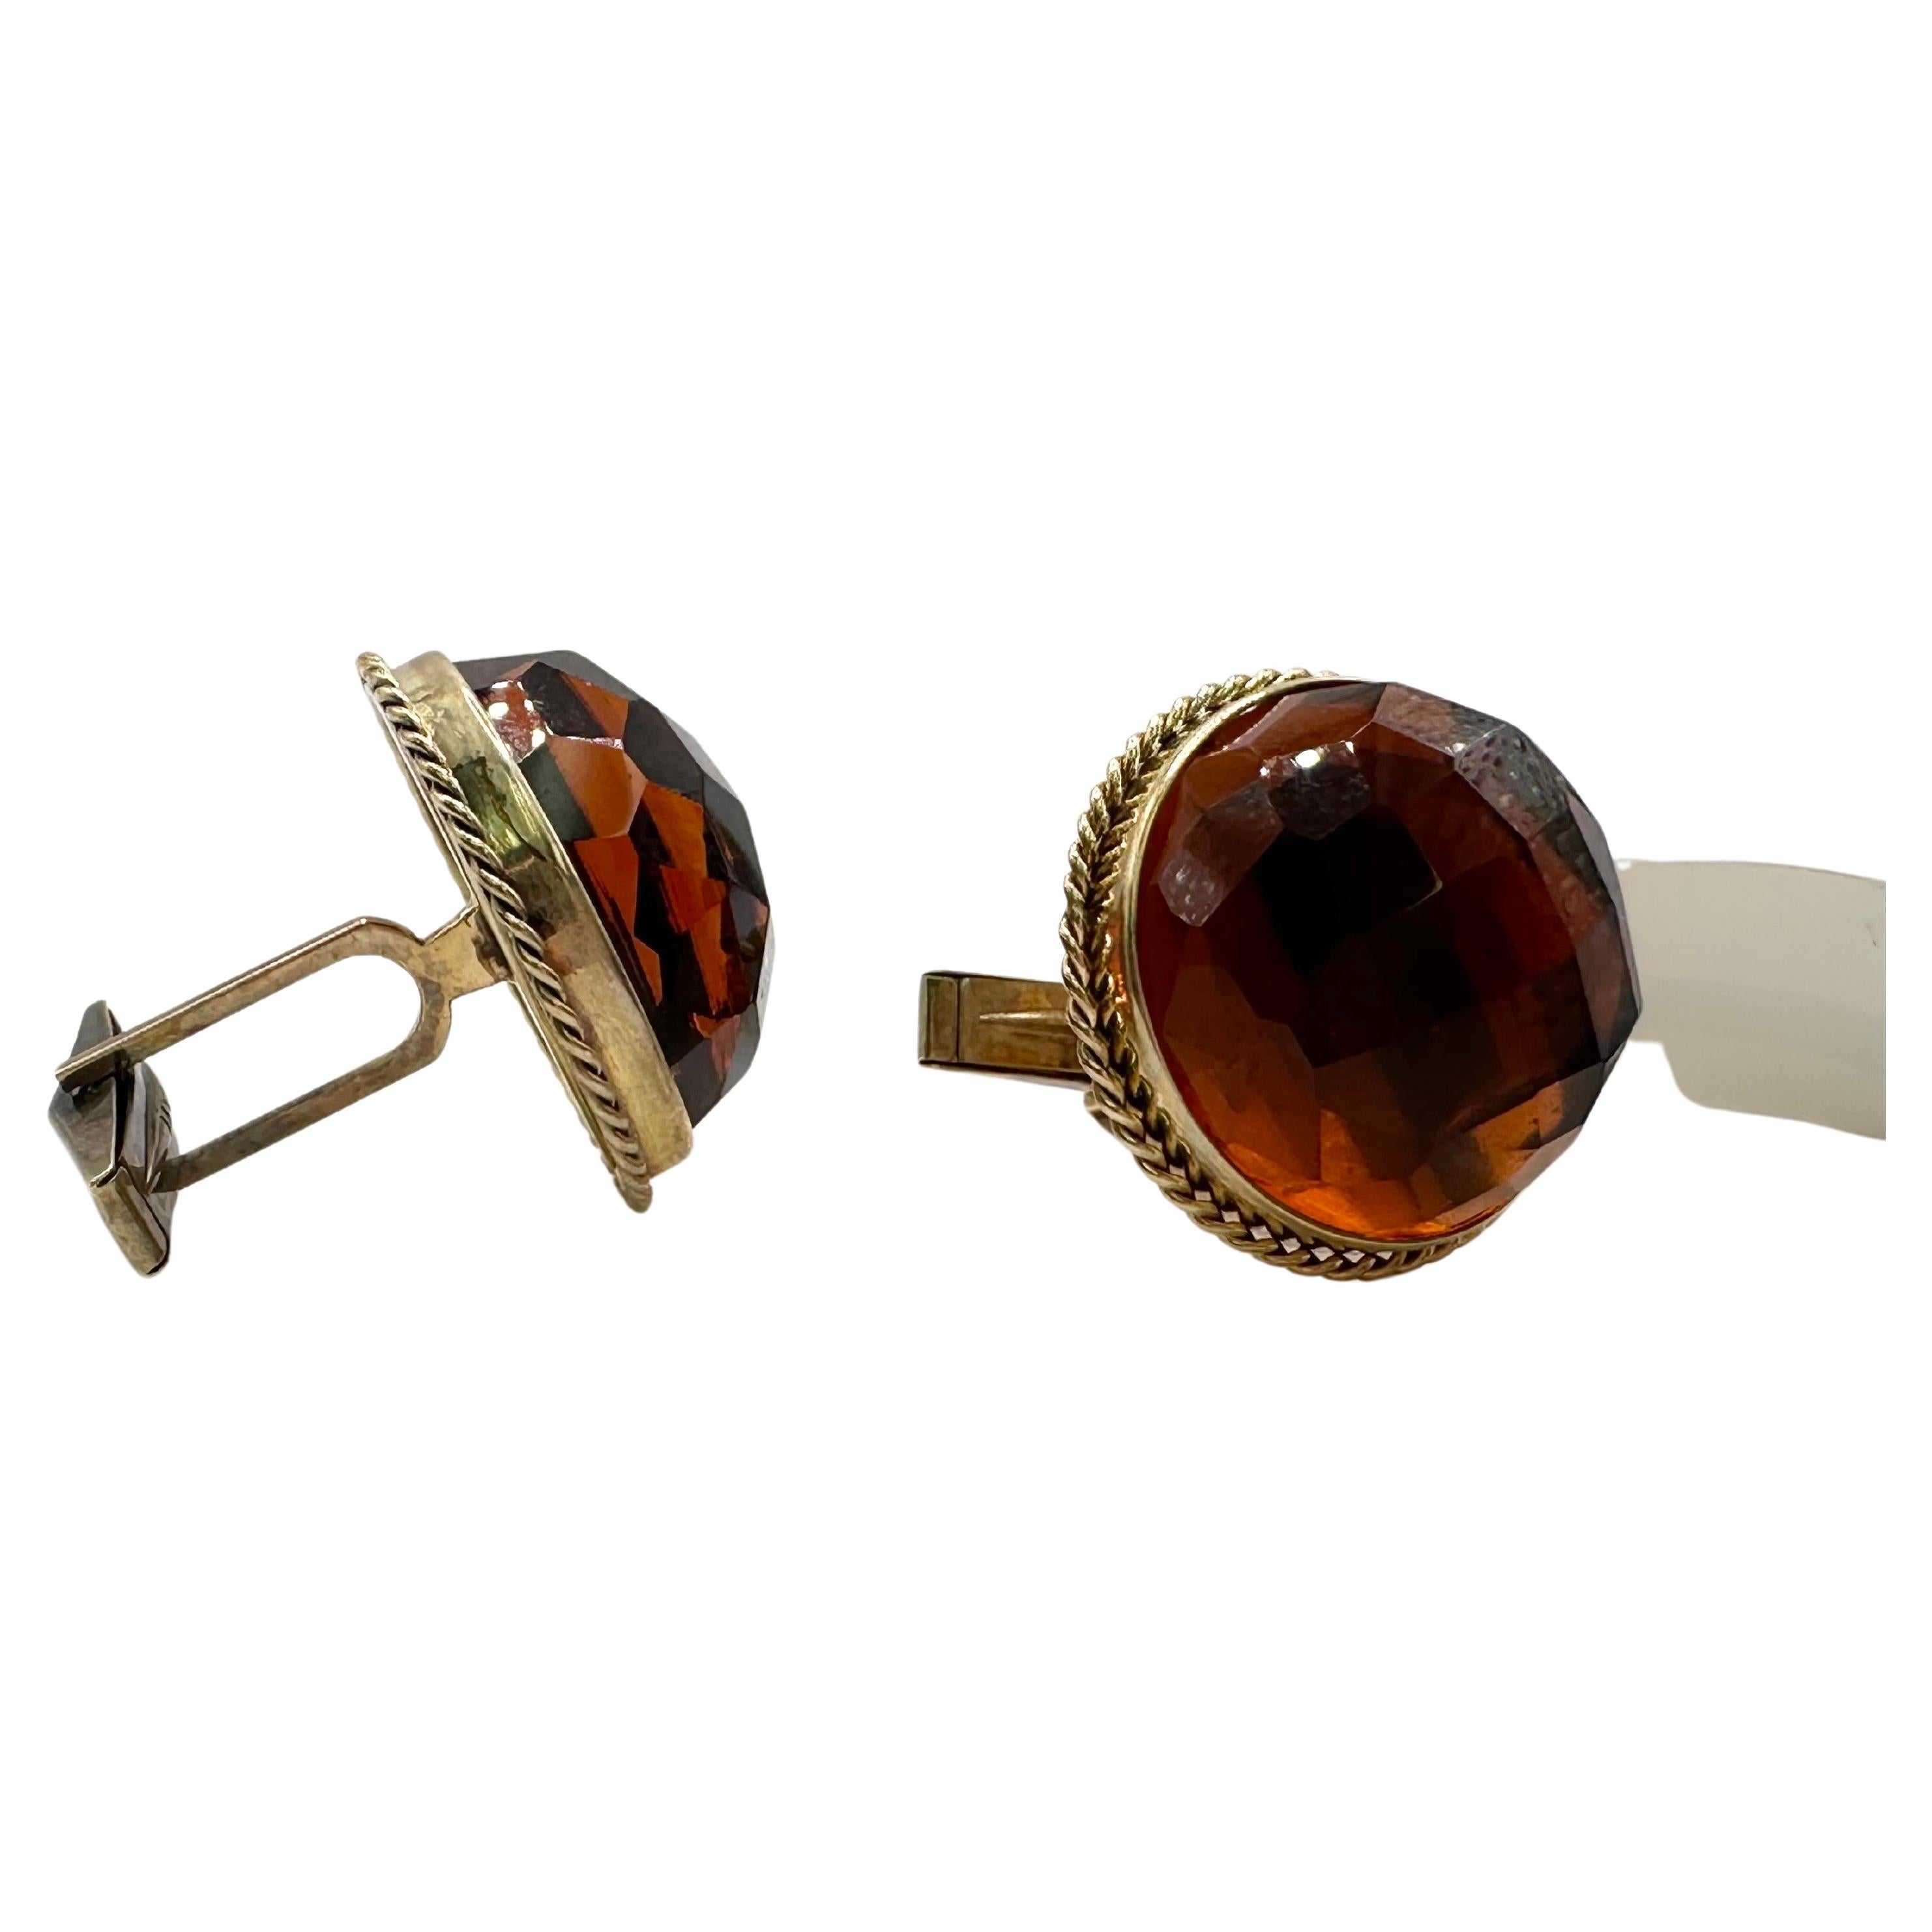 Stunning cufflinks made with natural citrines (dark orange color called cognac) and made in 14KT solid yellow gold. Very luxurious!

Certificate of authenticity comes with purchase!

ABOUT US
We are a family-owned business. Our studio in located in